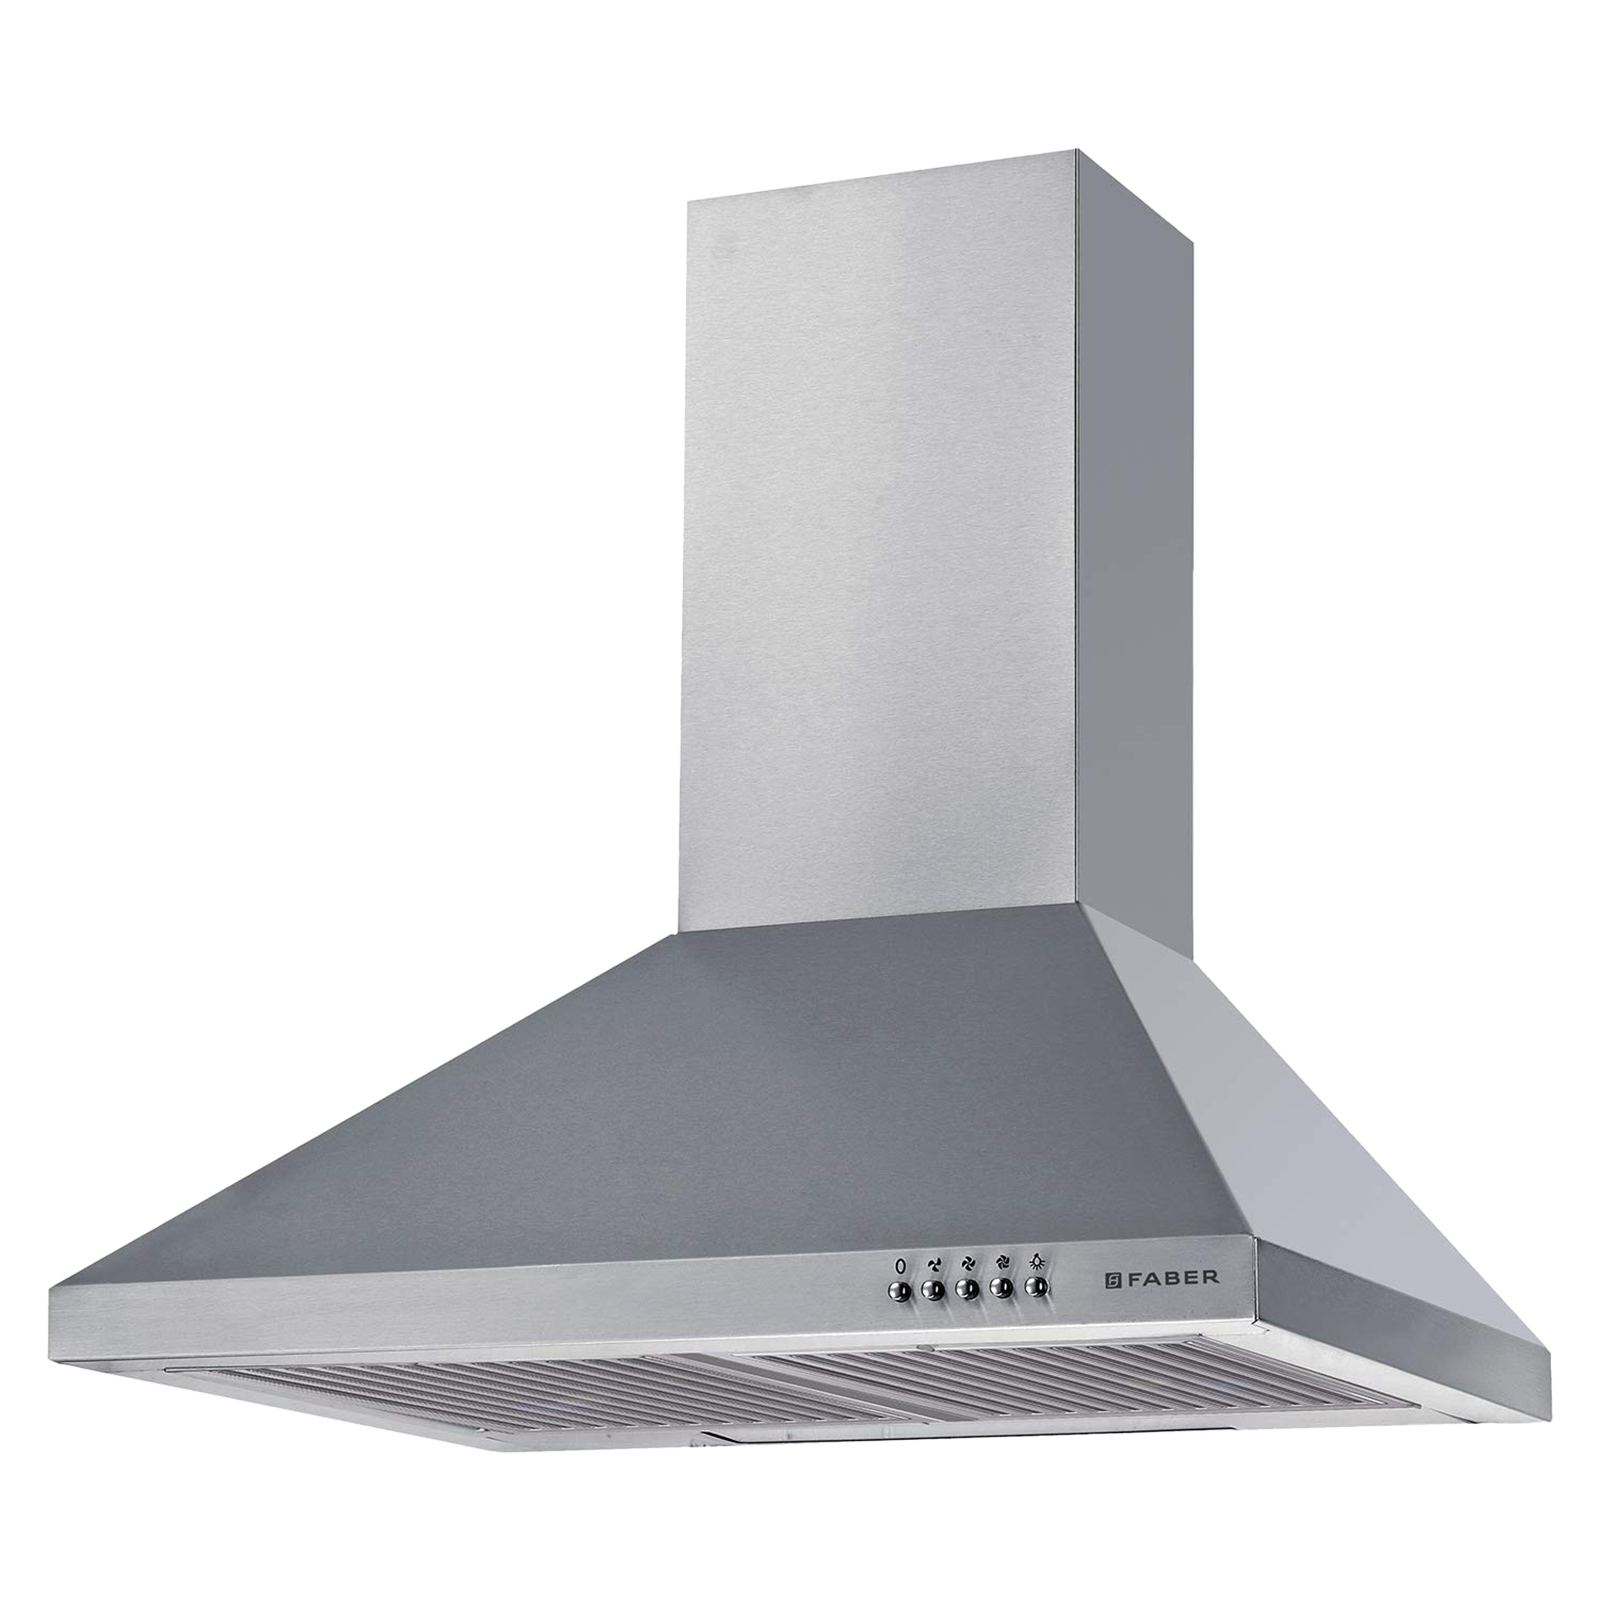 Faber Conico 800m³/hr 60cm Wall Mount Chimney (Baffle Filter, BfSS60, Stainless Steel)_1